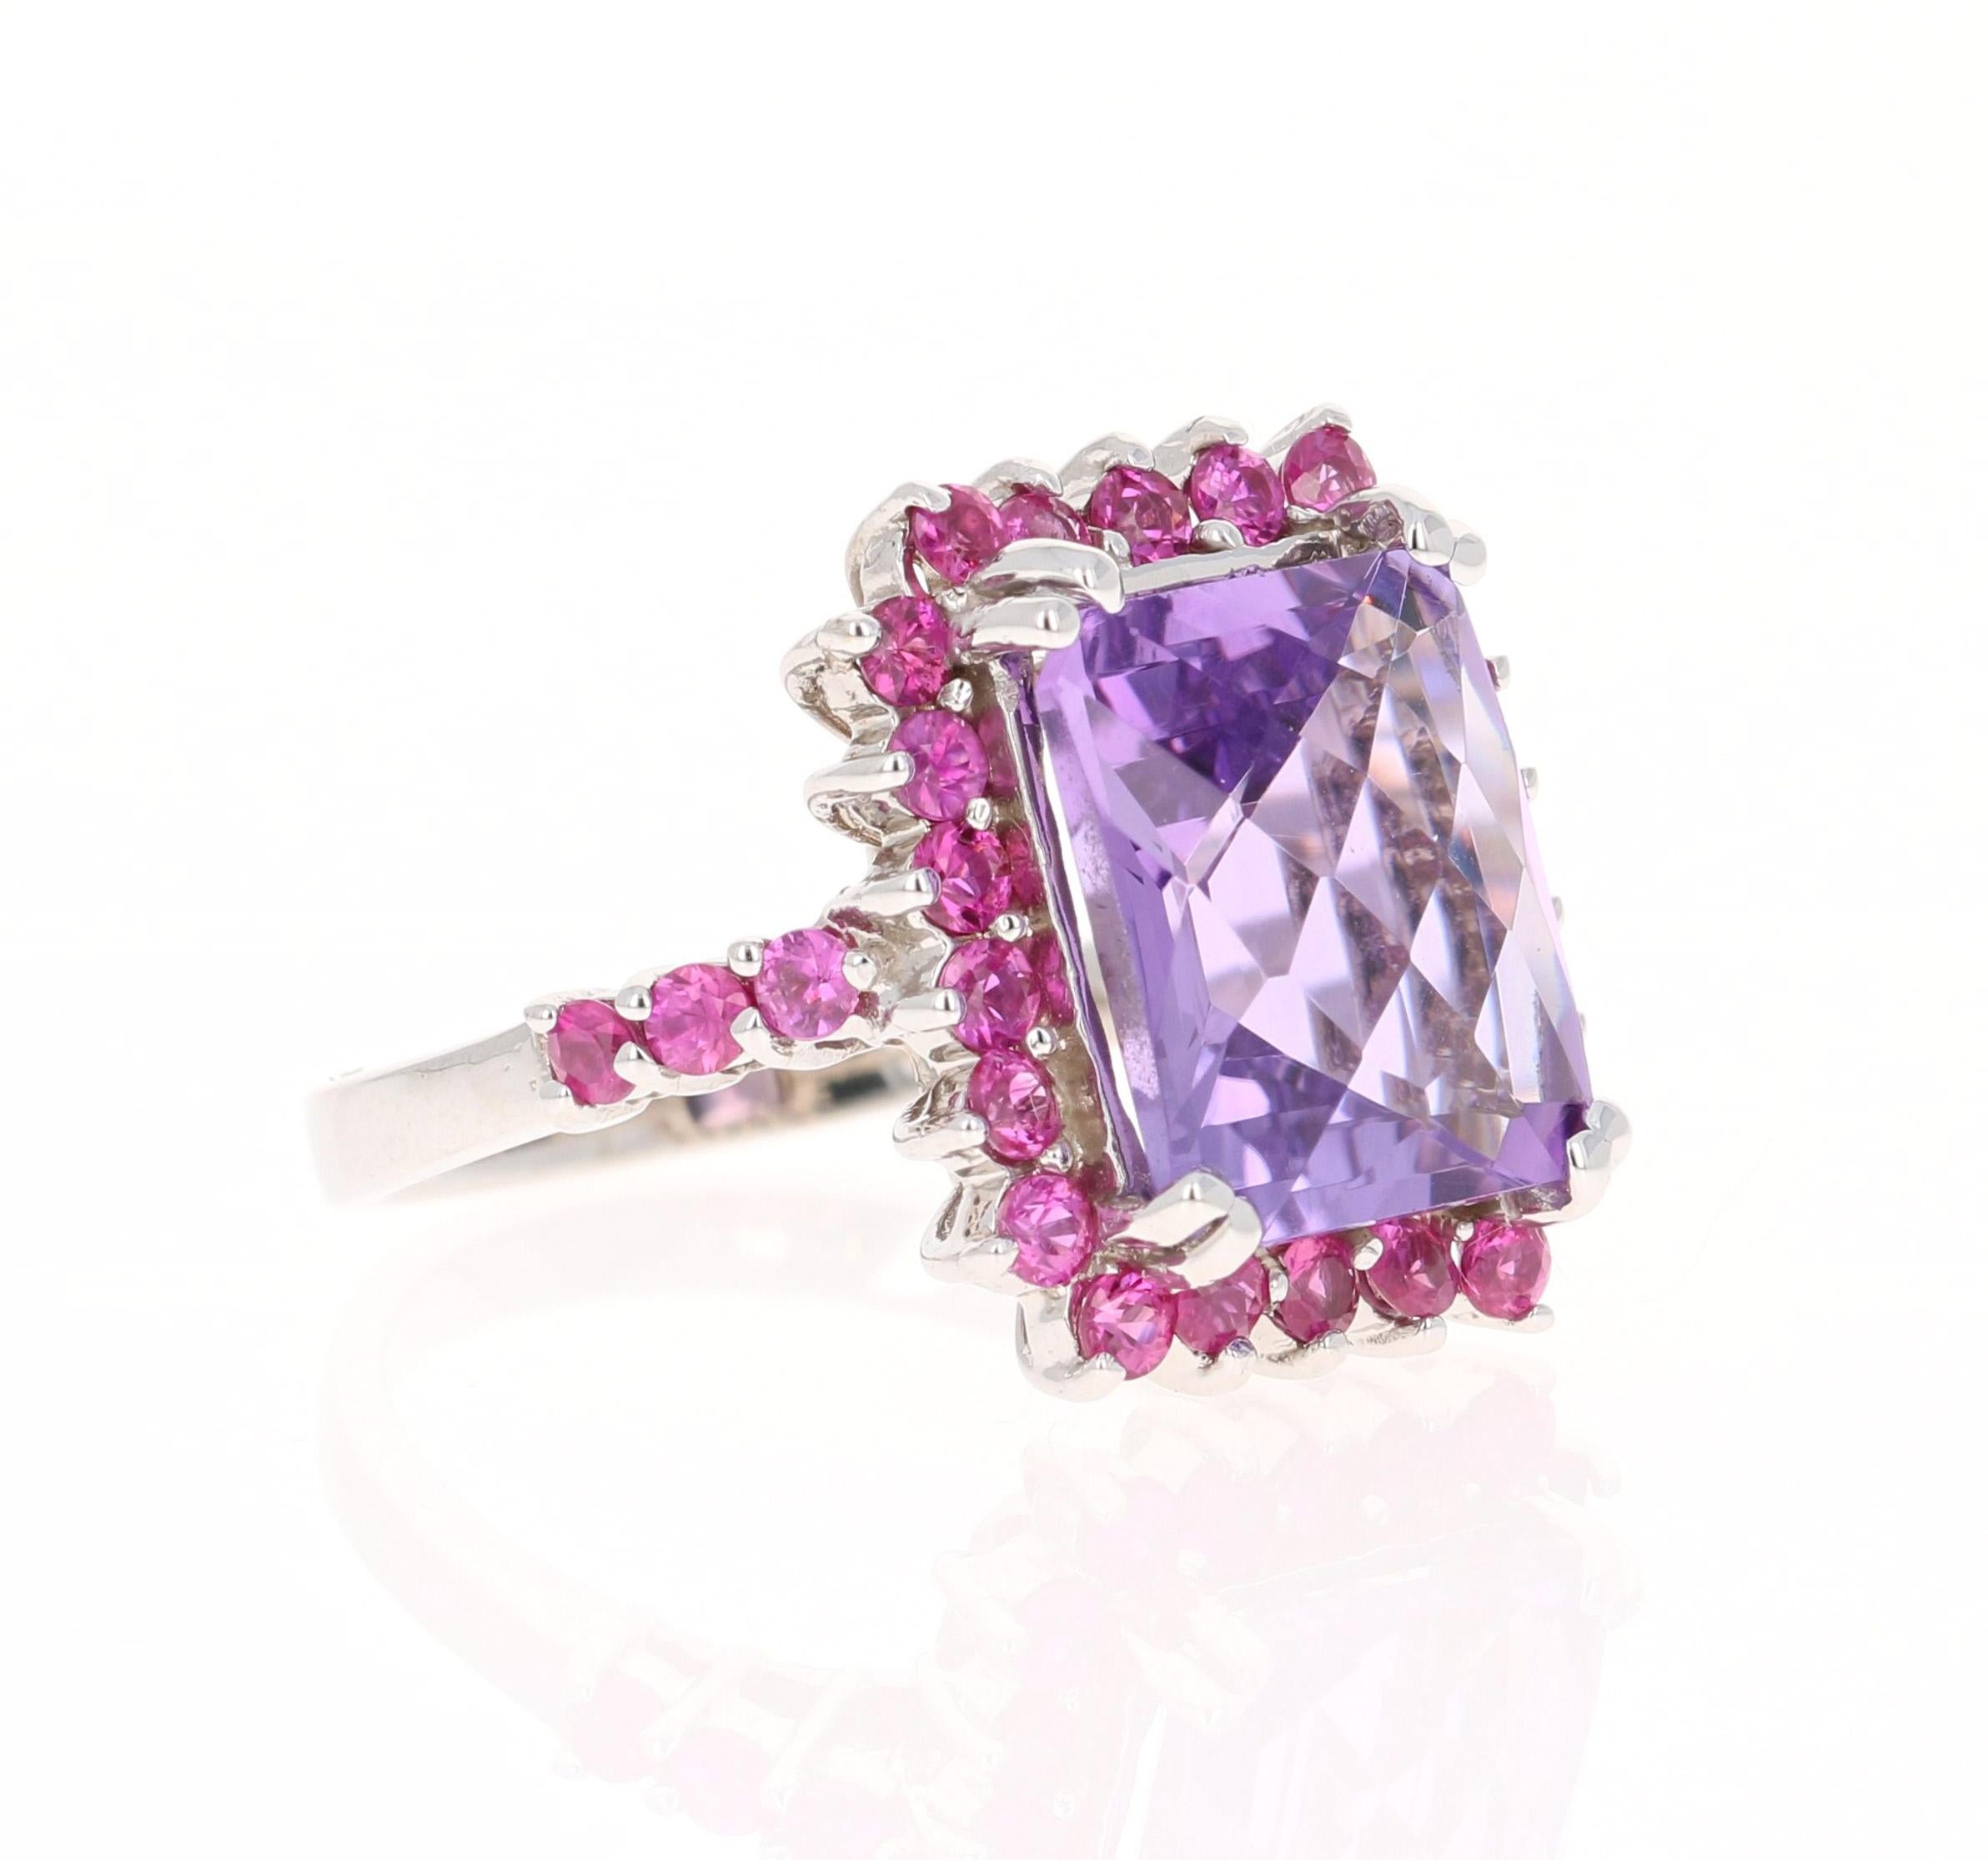 This ring has a beautiful Emerald Cut Amethyst that weighs 5.57 carats and 28 Pink Sapphires that weigh 1.22 carats. The total carat weight of the ring is 6.79 carats. 
The ring is crafted in 14 Karat White Gold and weighs approximately 5.9 grams.